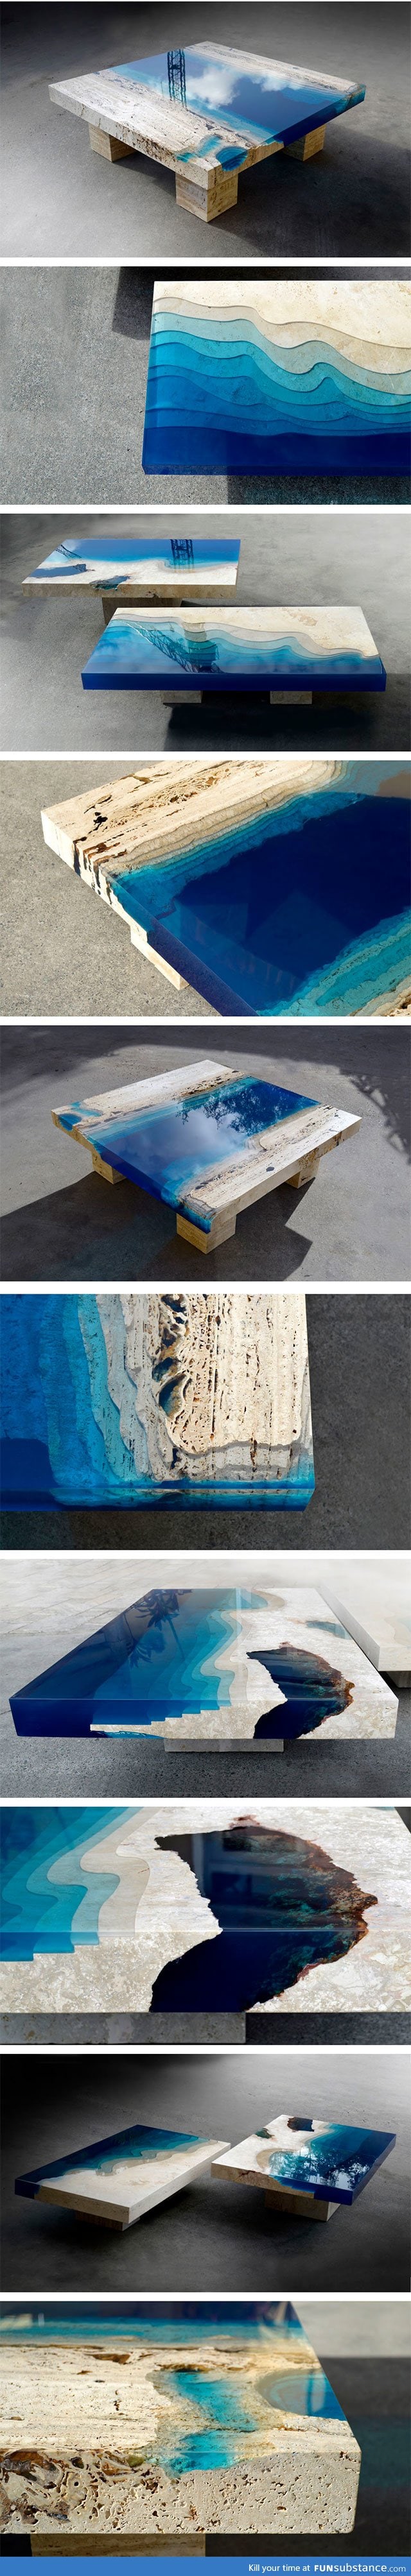 This Amazing Table Is Specially Created To Look Like The Ocean